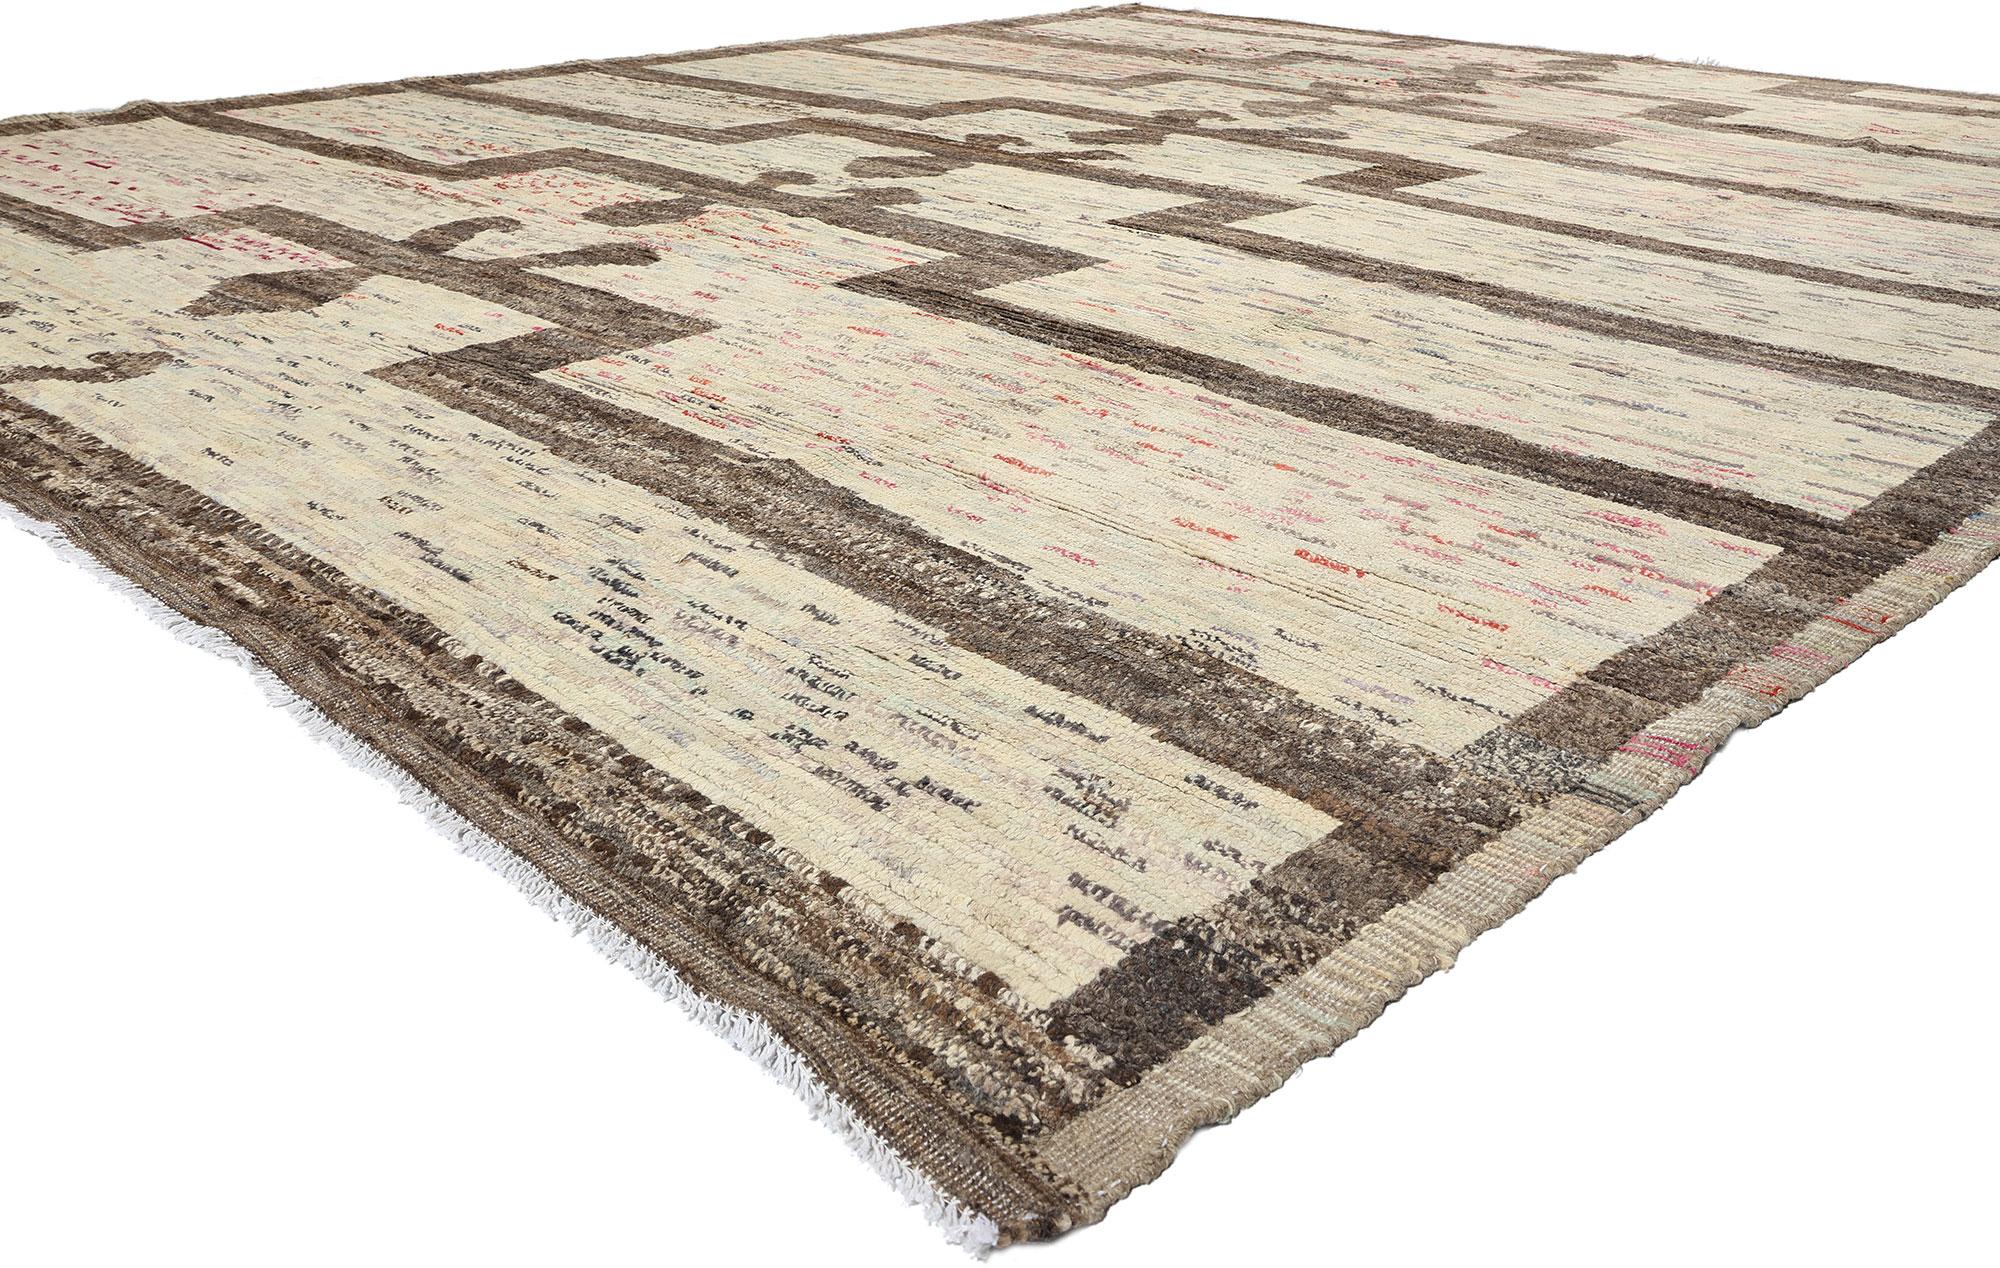 81066 Large Wabi-Sabi Boho Moroccan Rug, 12'01 x 14'08. ​Embark on a mesmerizing journey with this hand-knotted wool Modern Boho Moroccan rug, a breathtaking amalgamation of Bohemian charm and Wabi-Sabi essence. Crafted with meticulous care, this